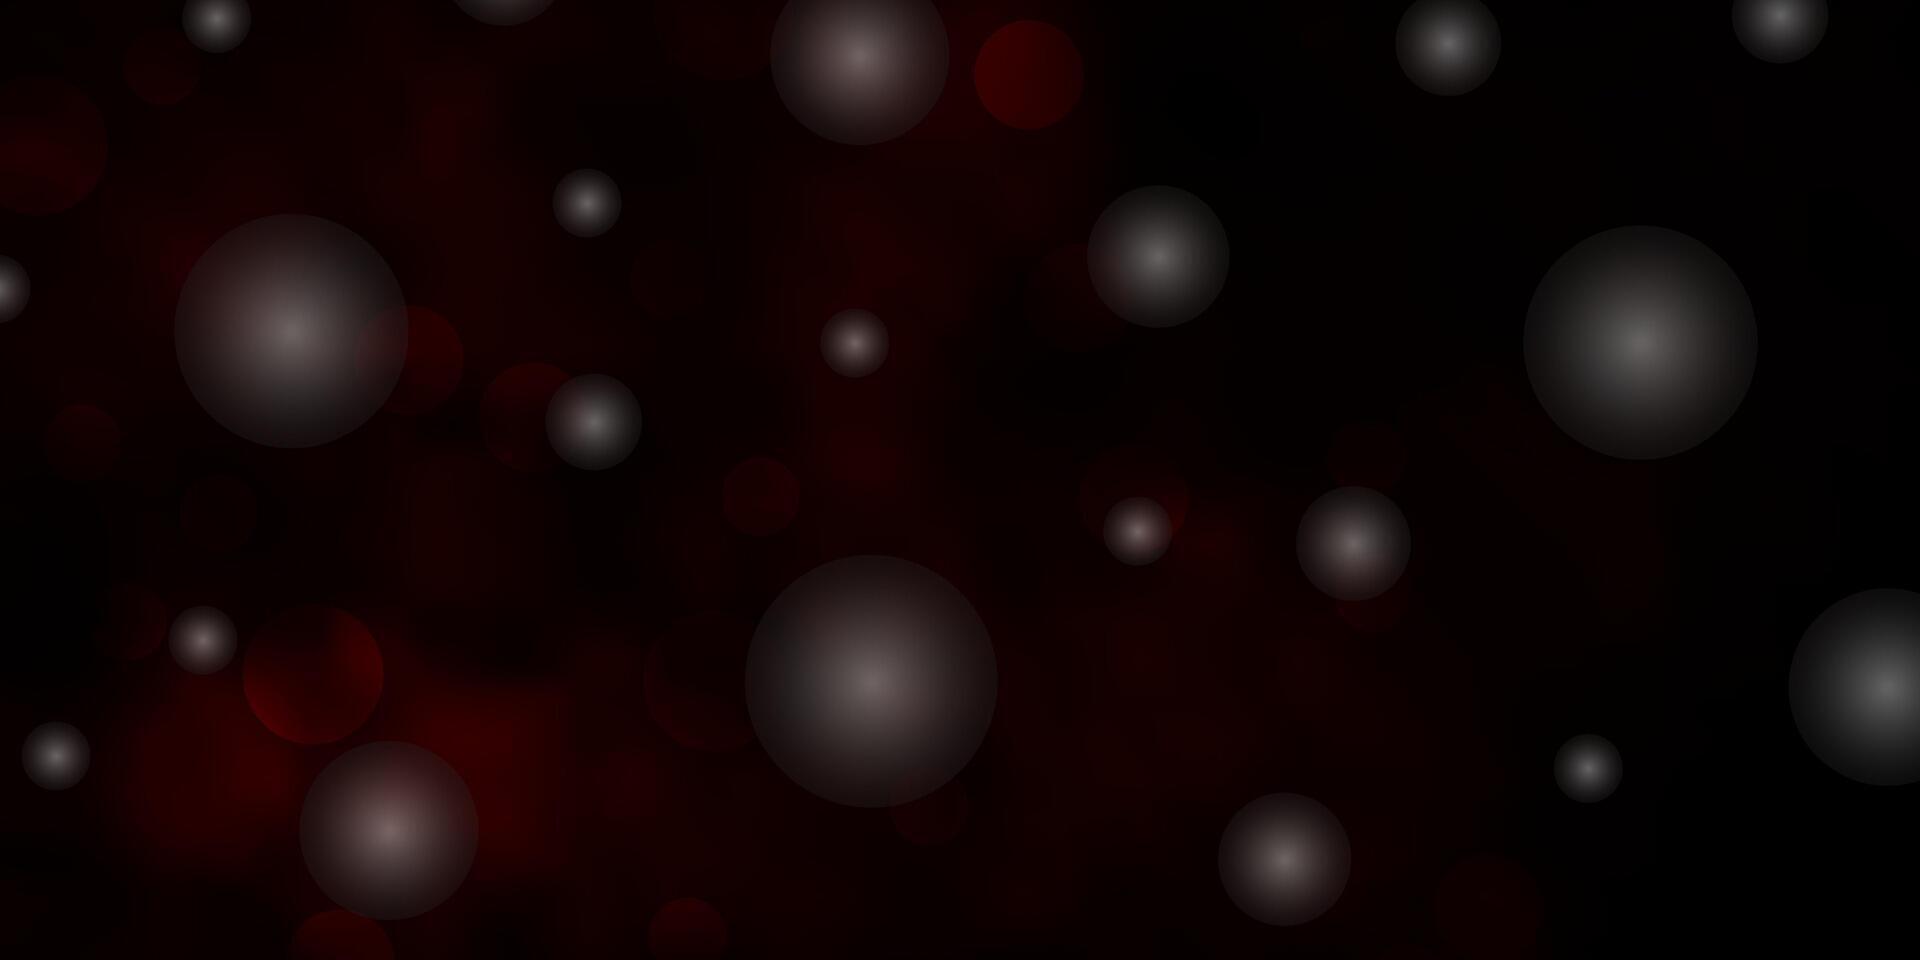 Dark Red vector pattern with circles, stars.